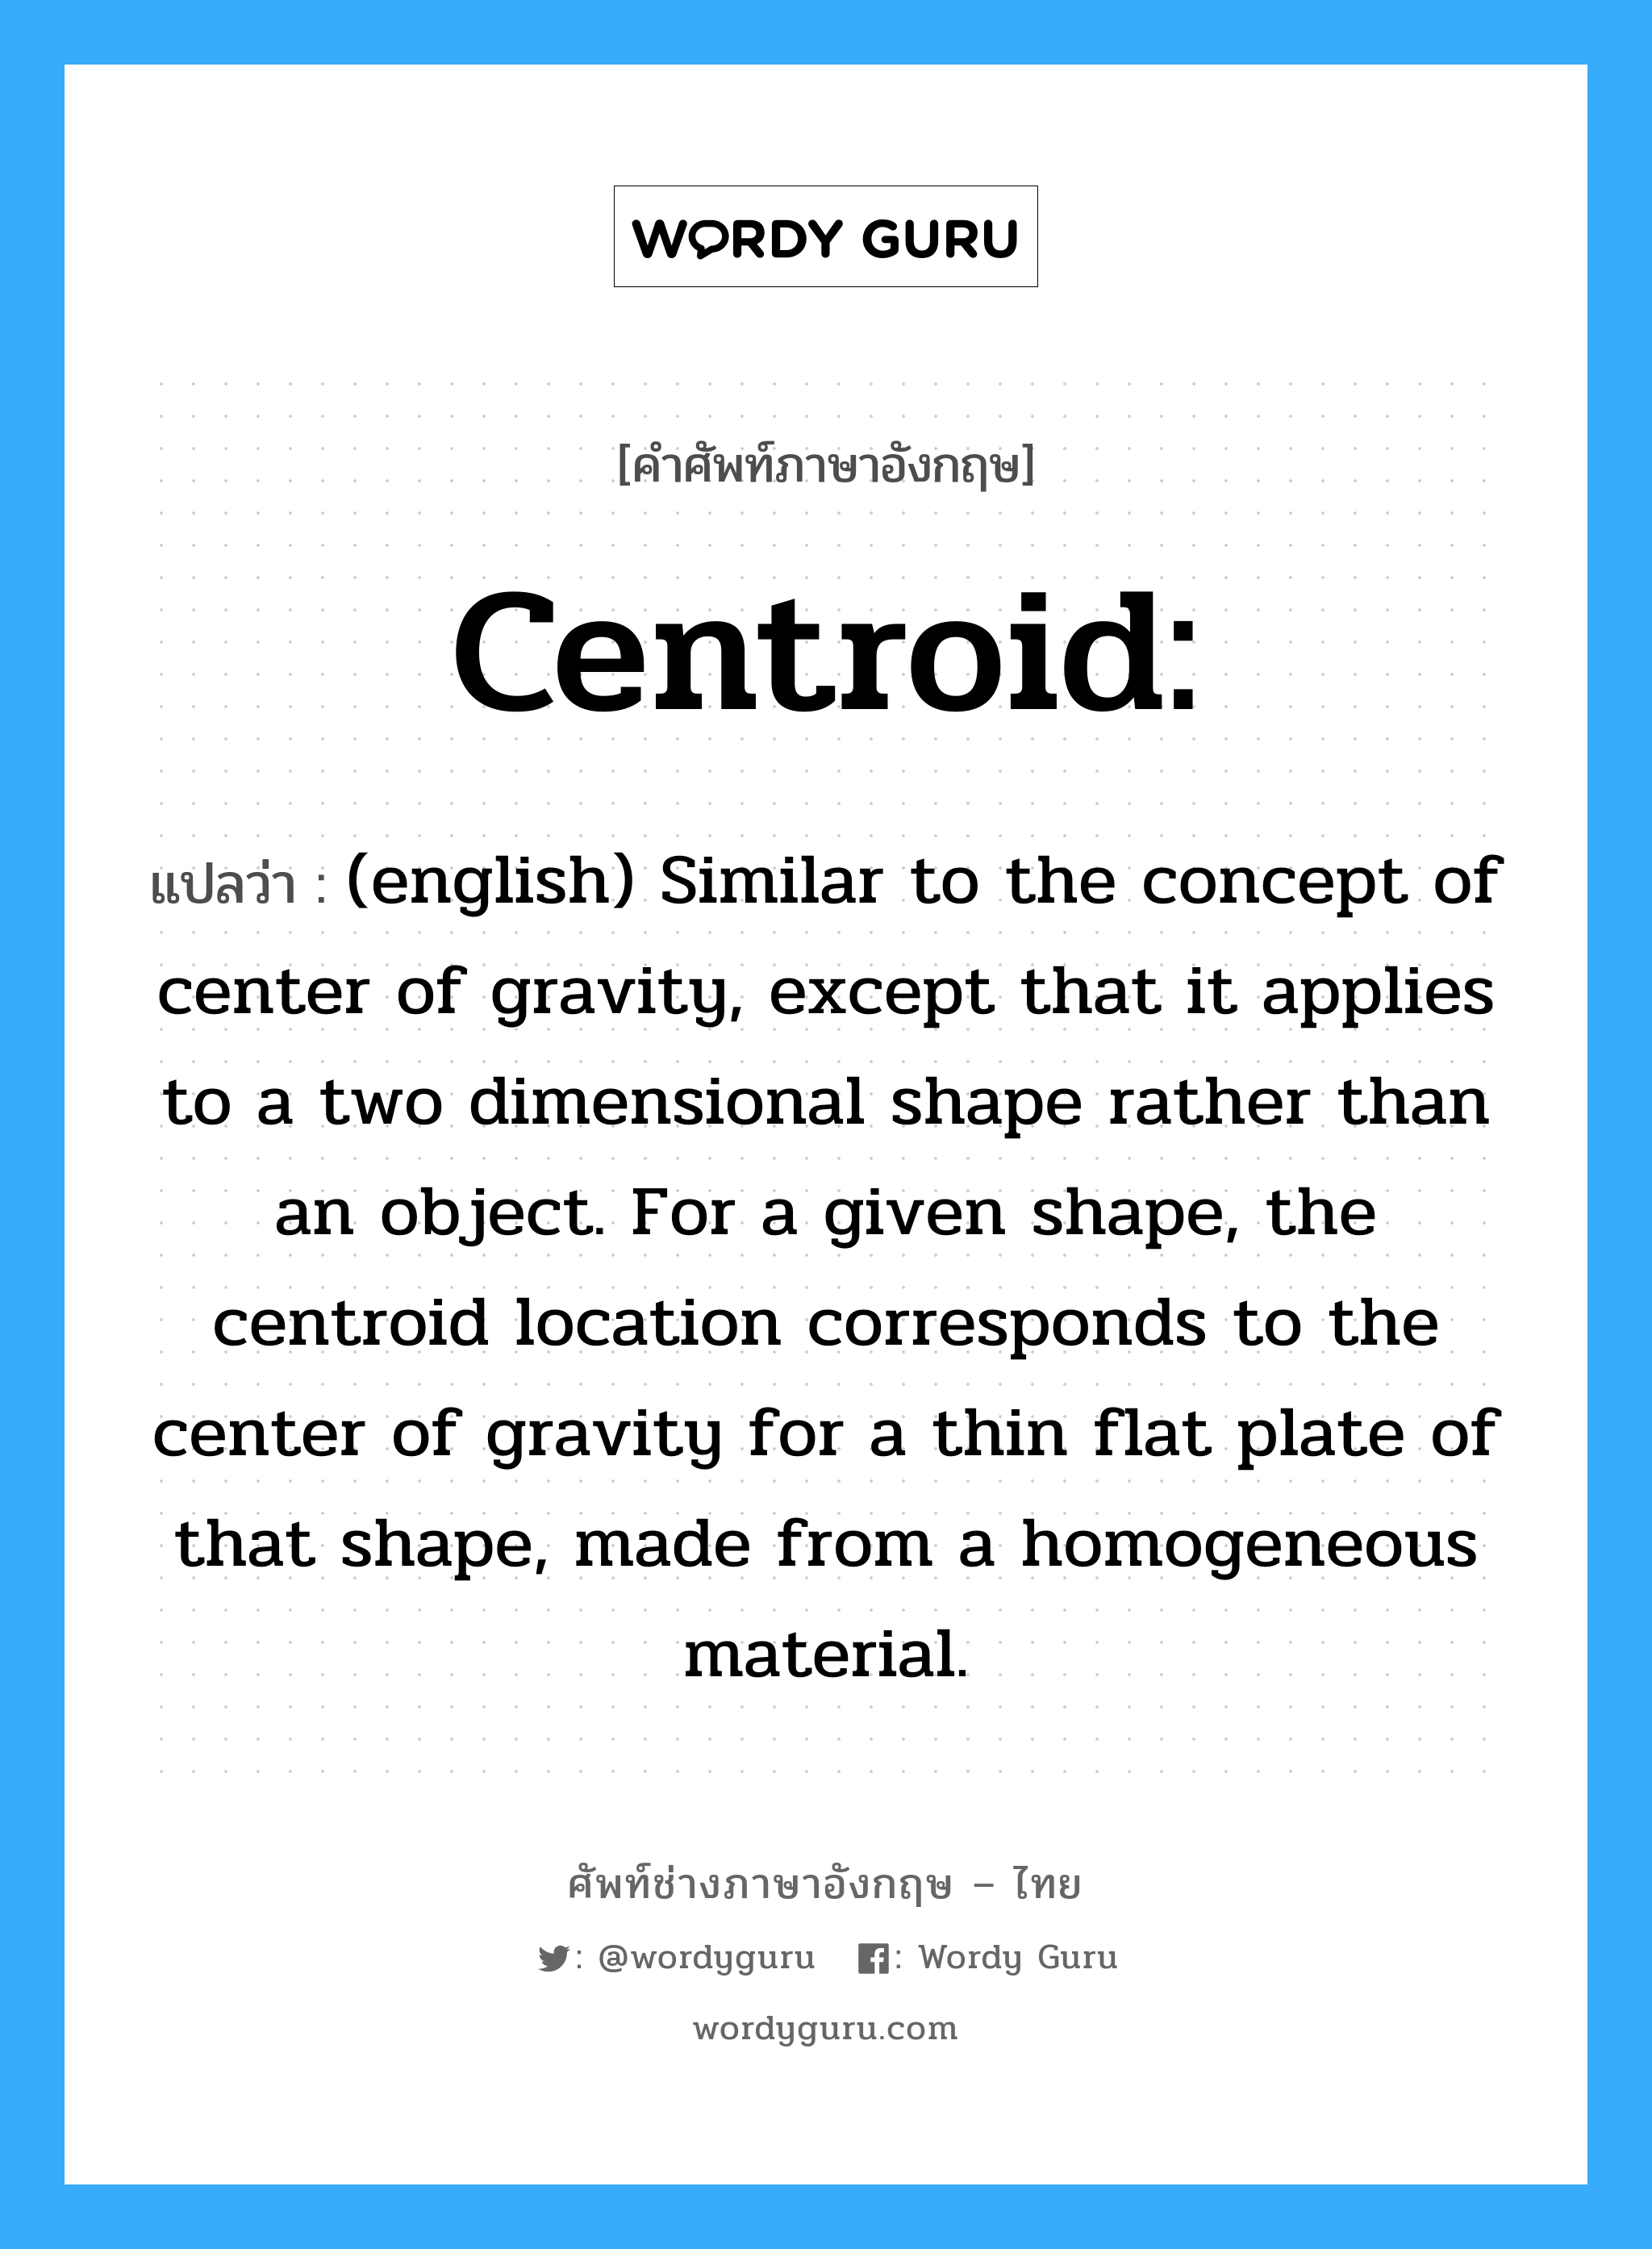 Centroid: แปลว่า?, คำศัพท์ช่างภาษาอังกฤษ - ไทย Centroid: คำศัพท์ภาษาอังกฤษ Centroid: แปลว่า (english) Similar to the concept of center of gravity, except that it applies to a two dimensional shape rather than an object. For a given shape, the centroid location corresponds to the center of gravity for a thin flat plate of that shape, made from a homogeneous material.